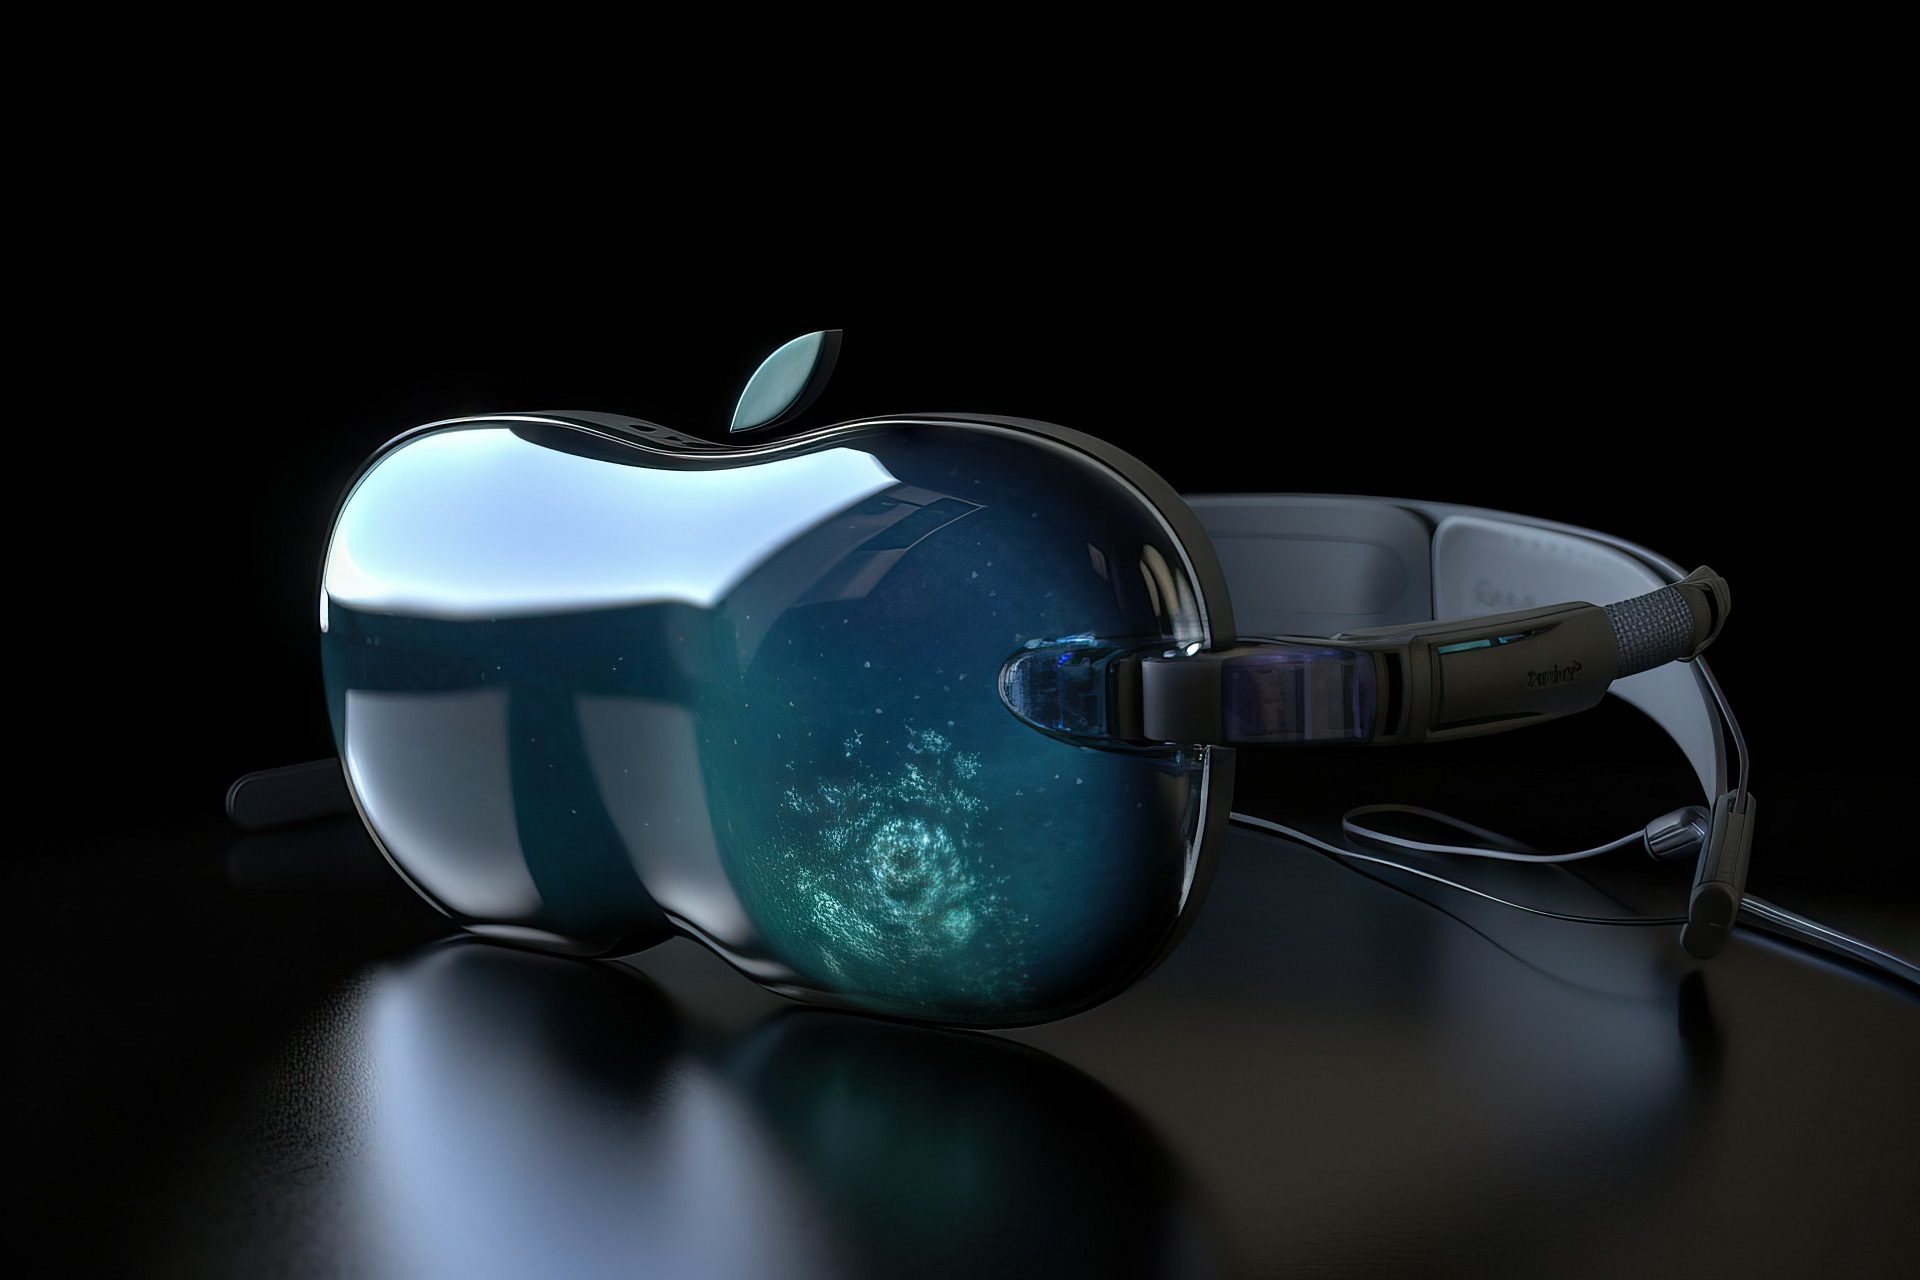 What Apple’s Vision Pro Headset Tells Us About The Future of the Internet